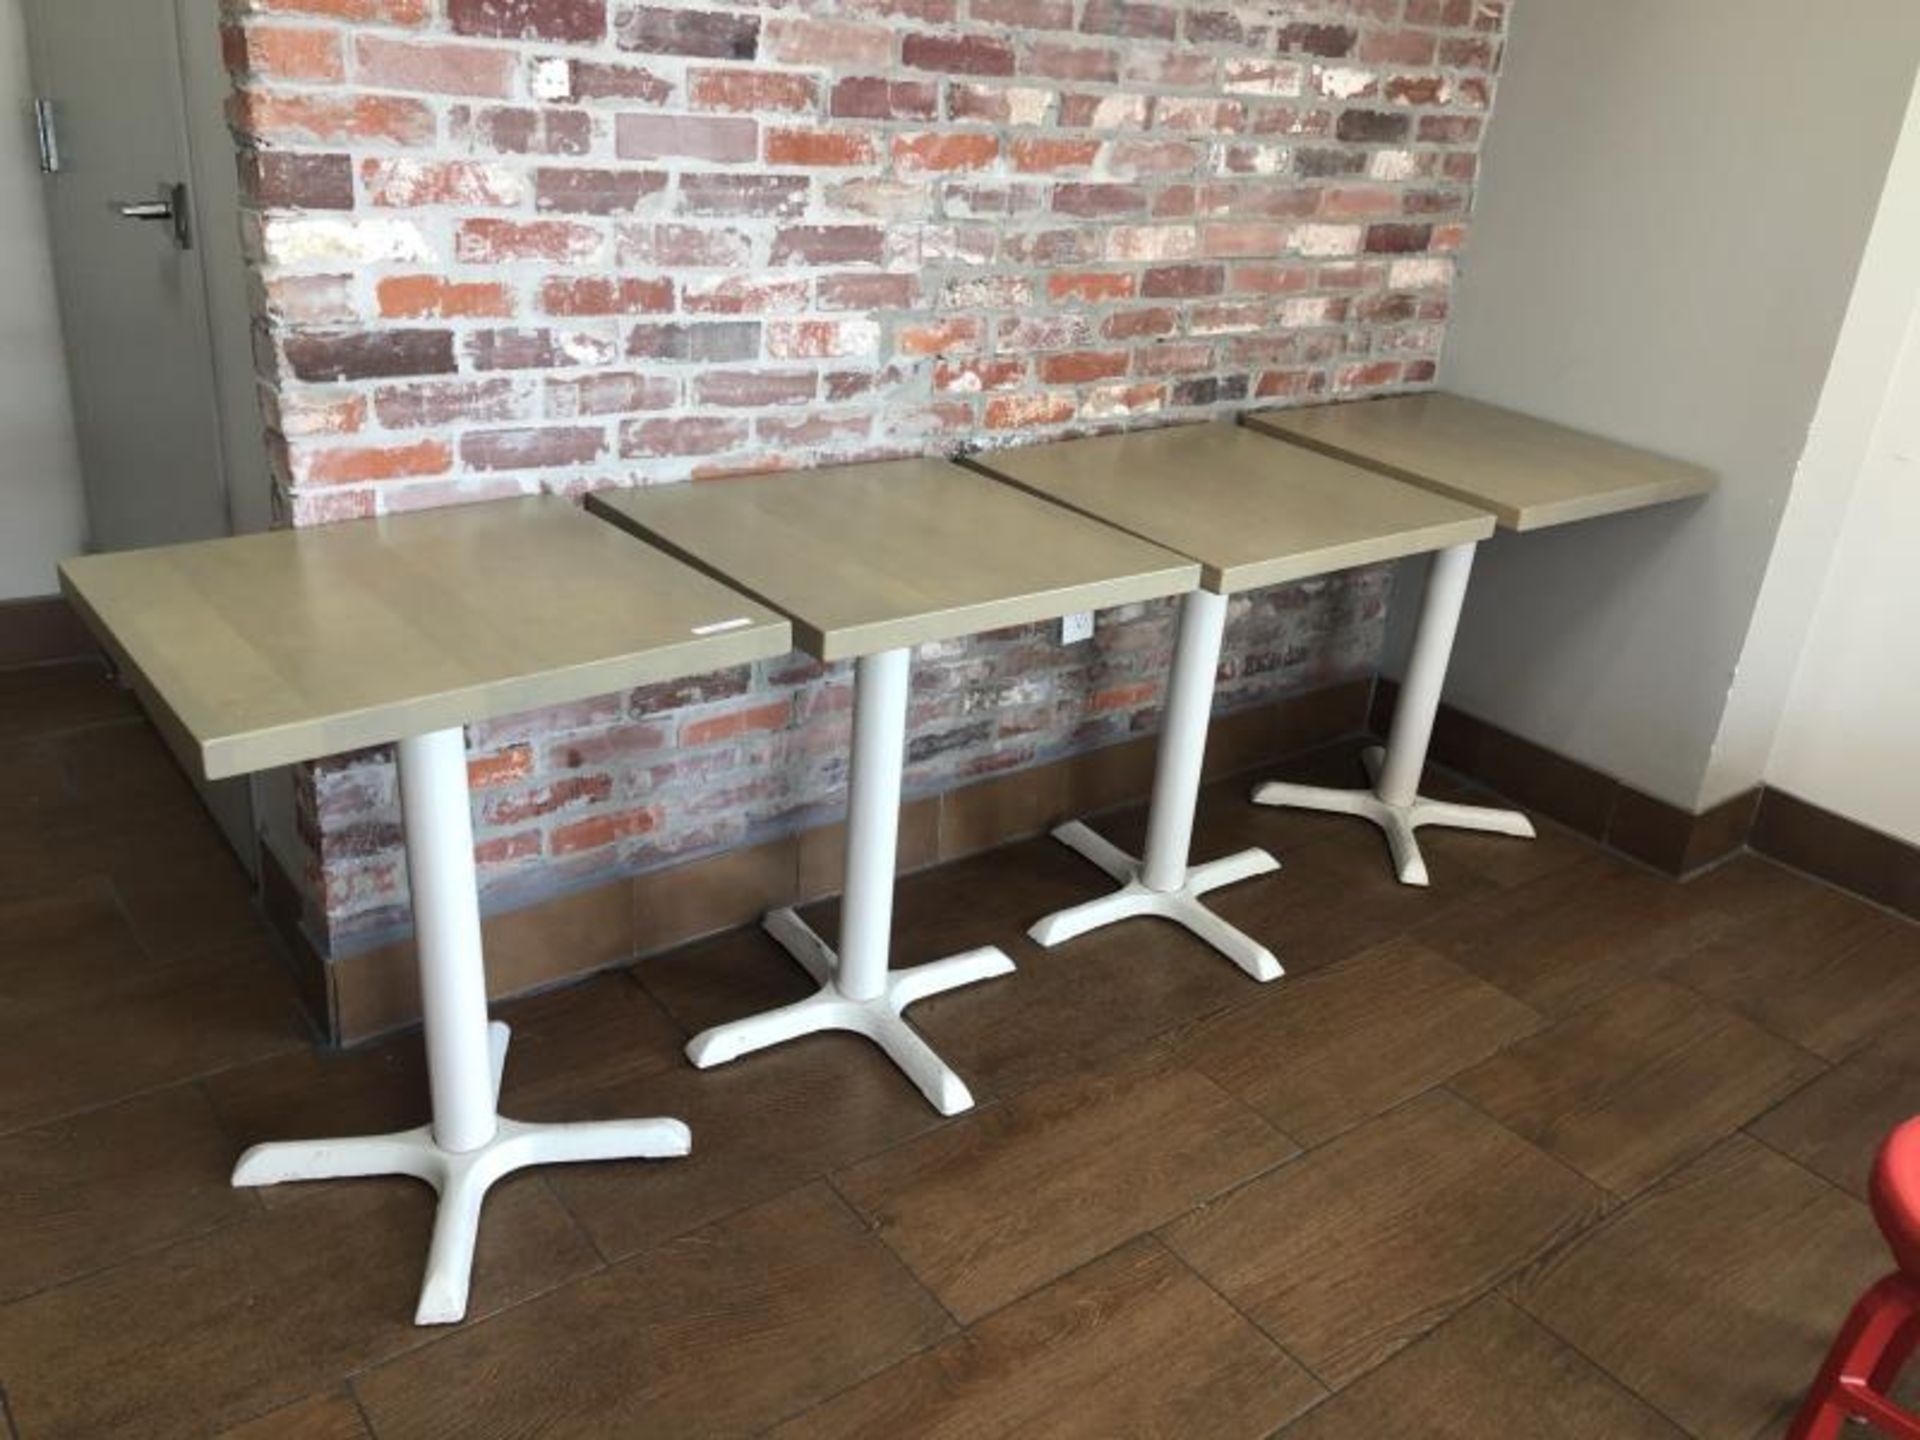 Lot of 4 Metal Based Table with Wood Top